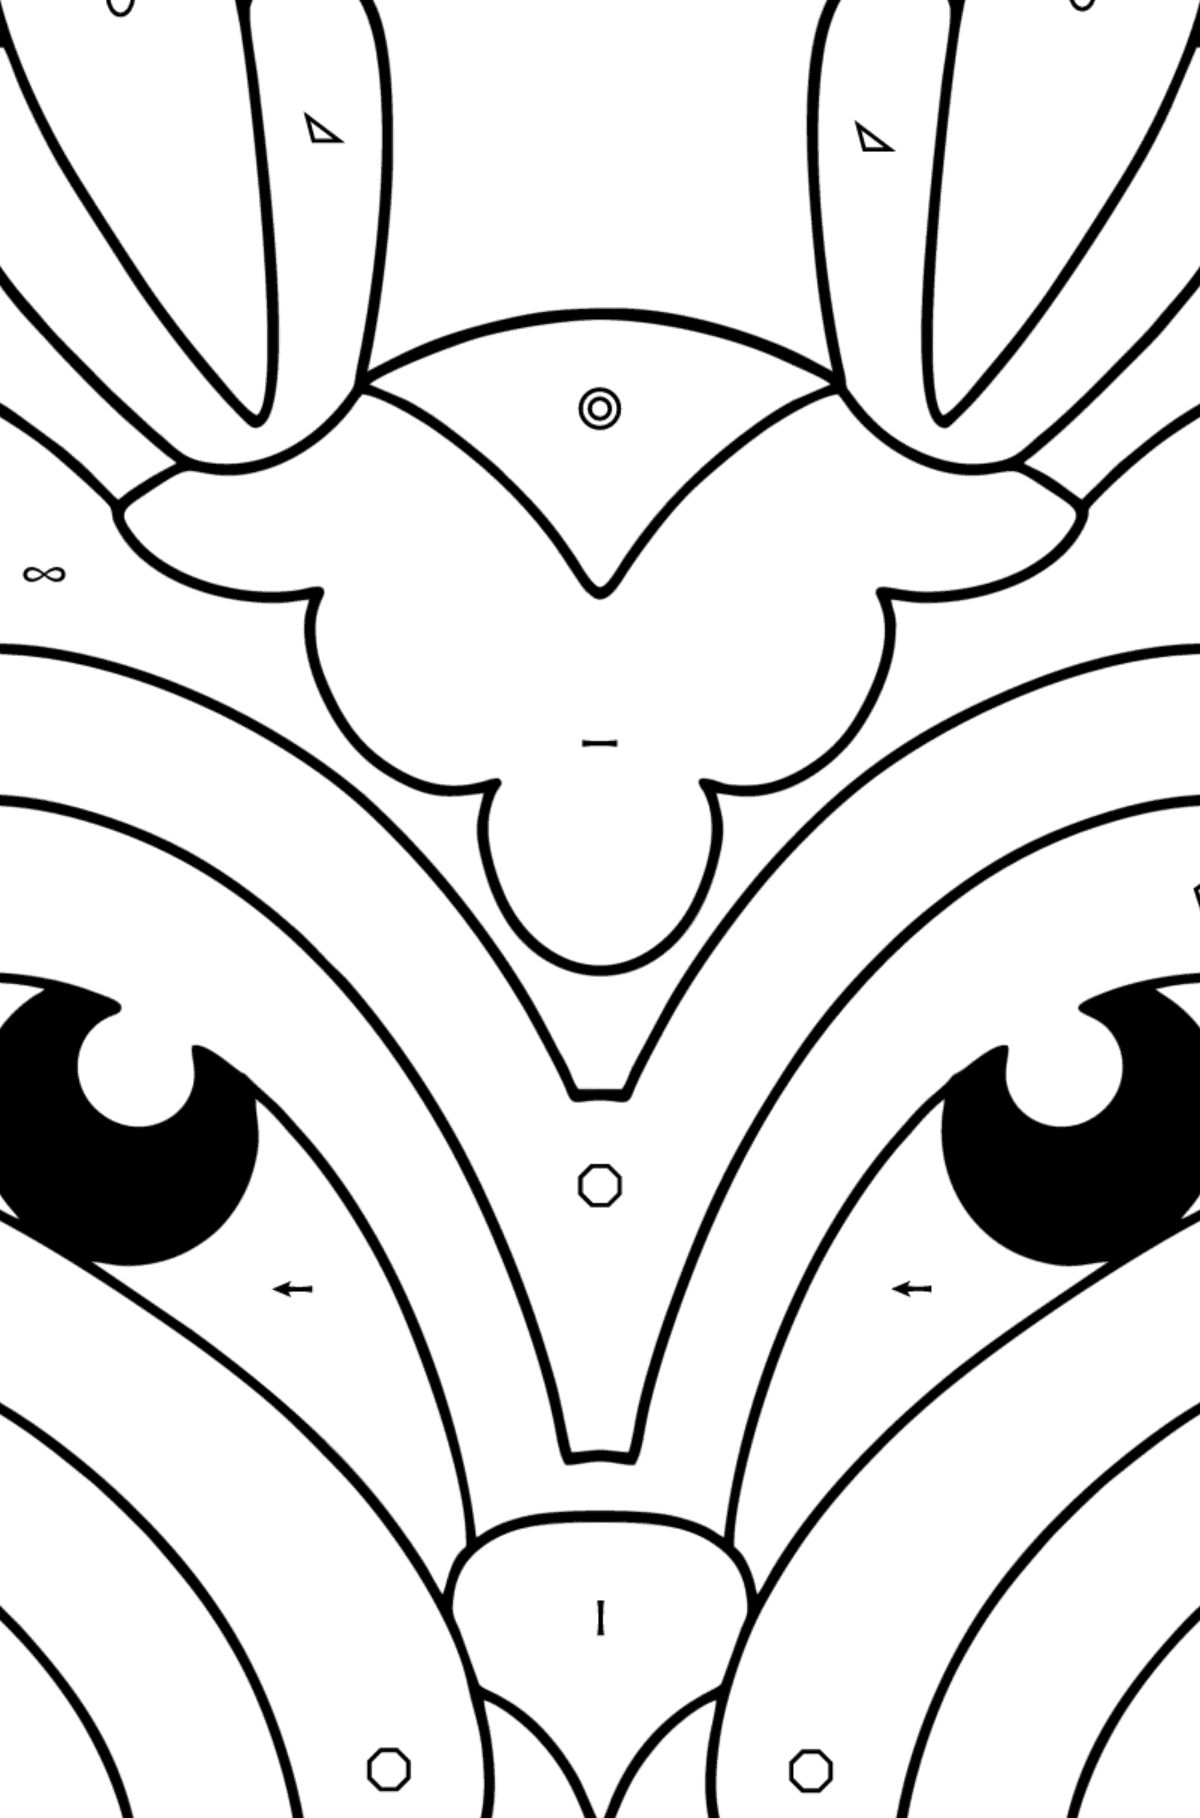 Deer Anti stress coloring page - Coloring by Symbols and Geometric Shapes for Kids